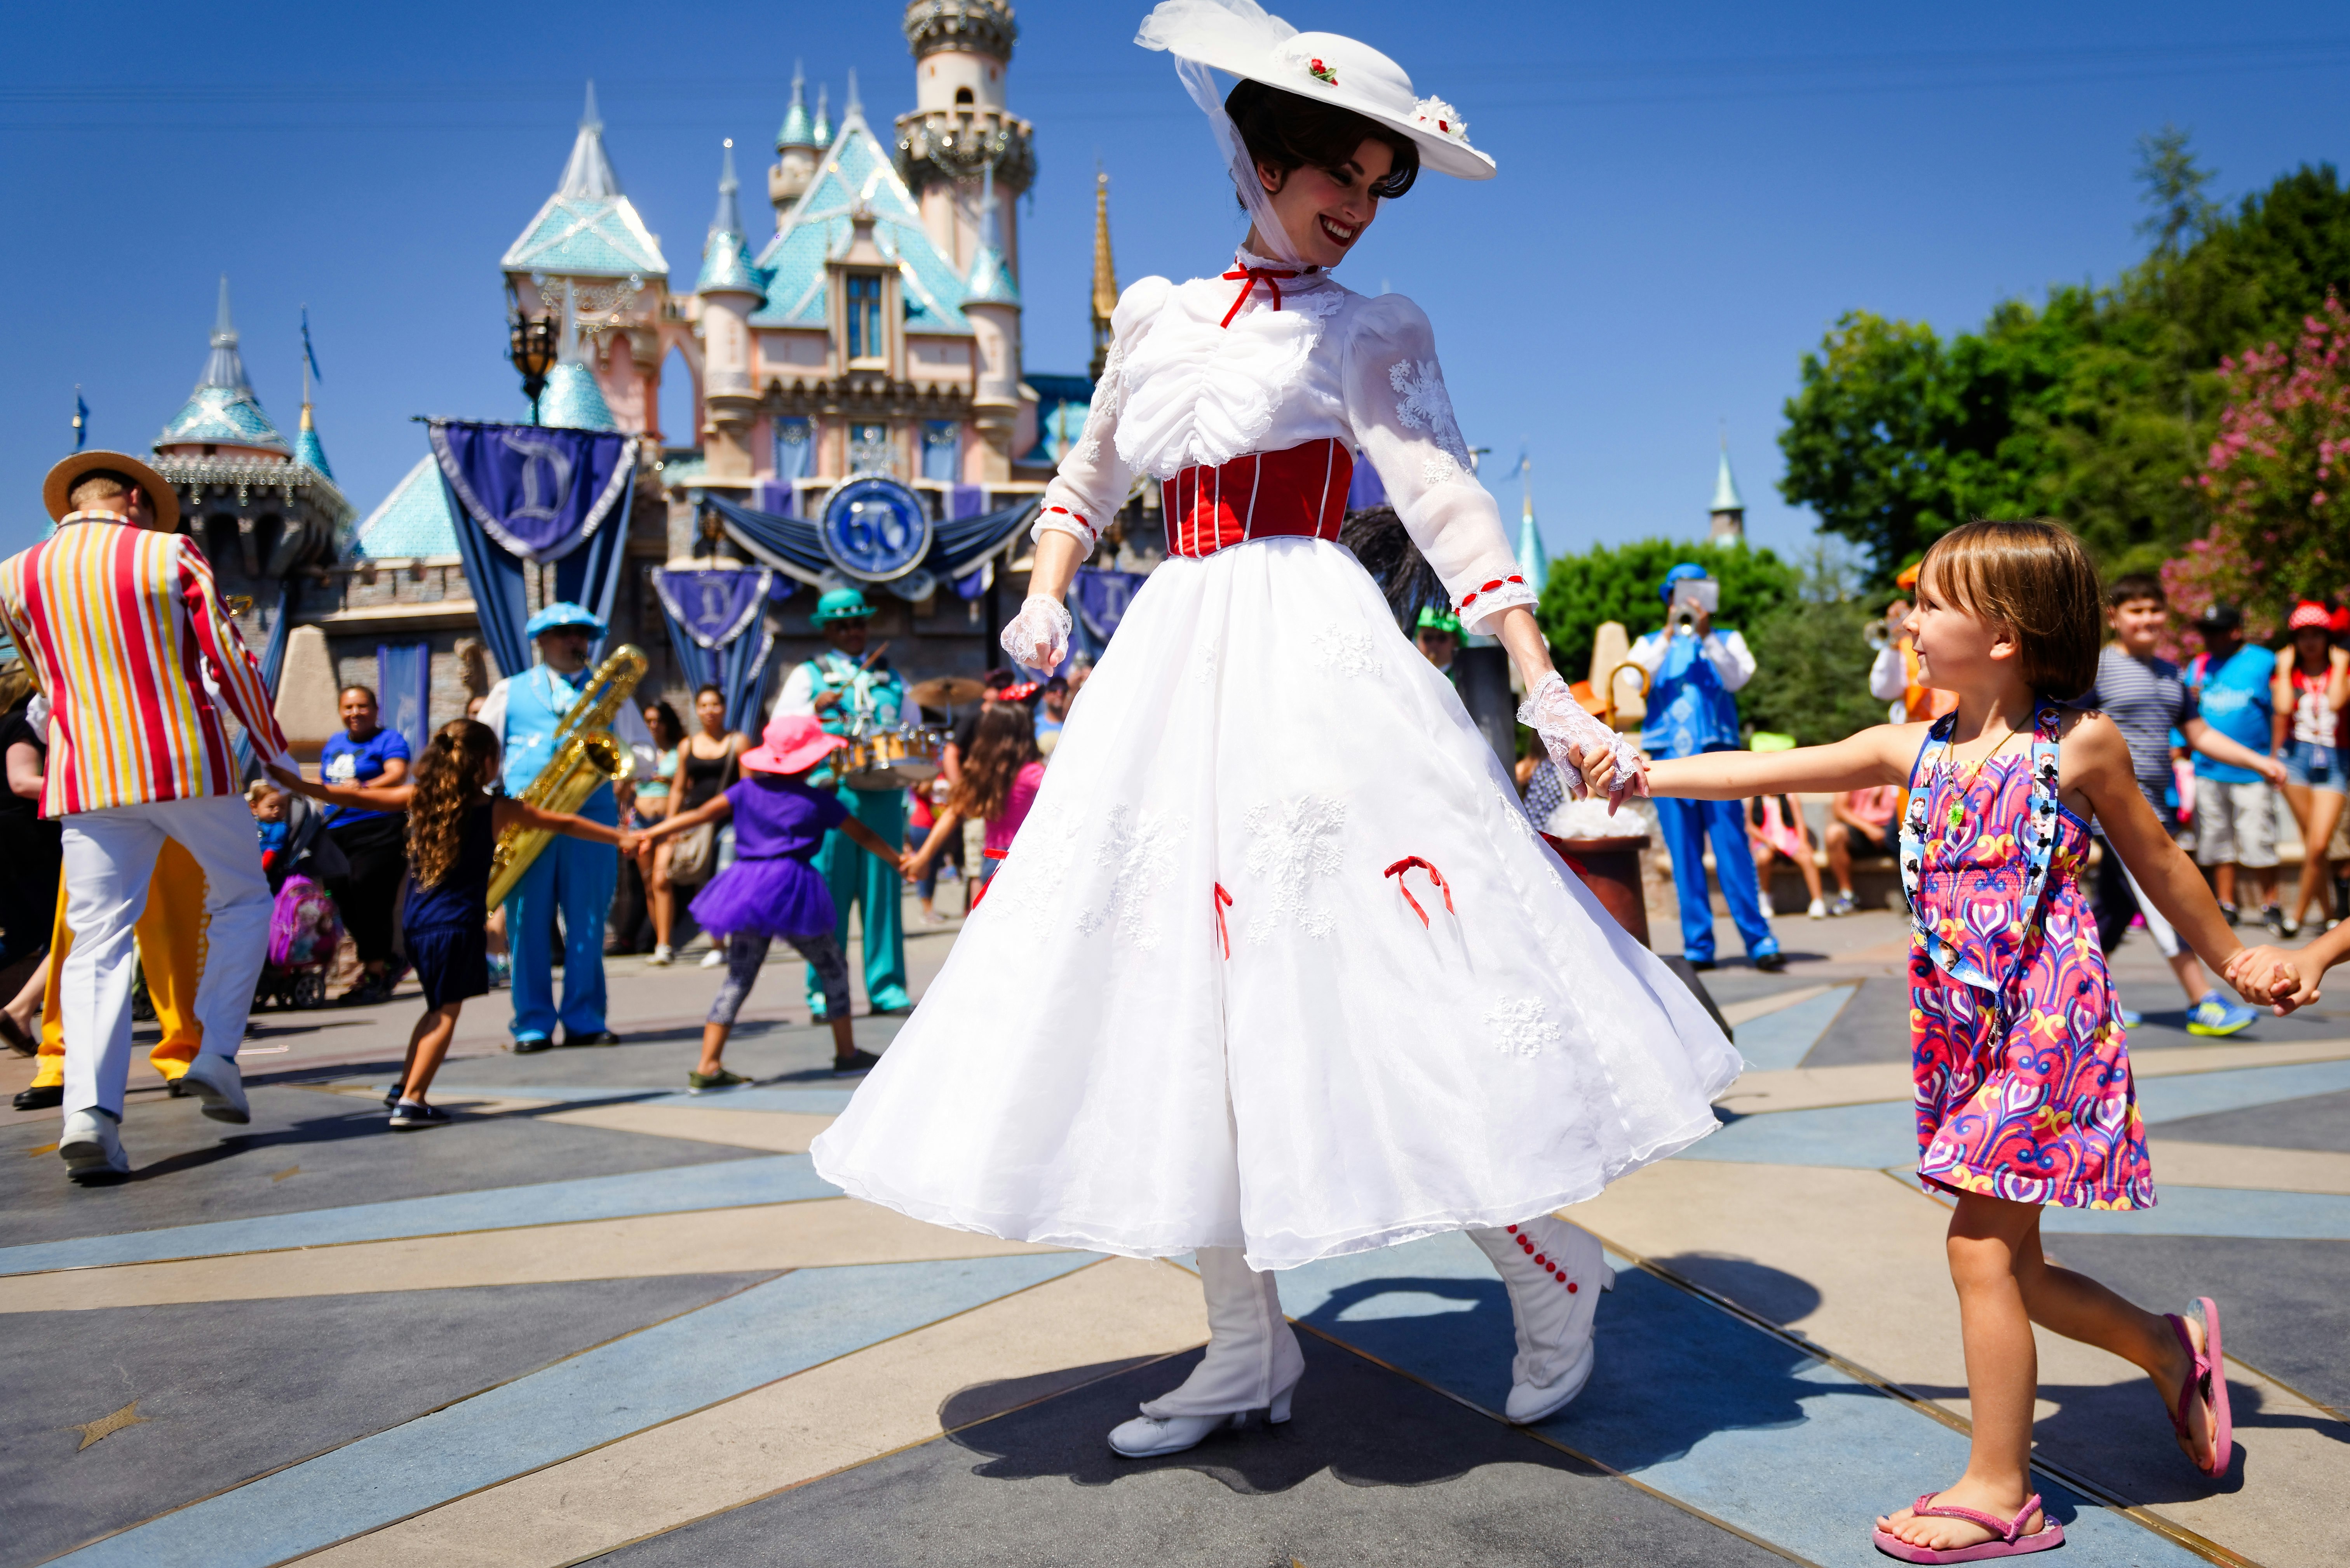 An actress dressed as Mary Poppins smiles at a young child as she leads a line of children in song and dance in front of Cinderella's castle during Disney's 60th Diamond Celebration at Disneyland California.